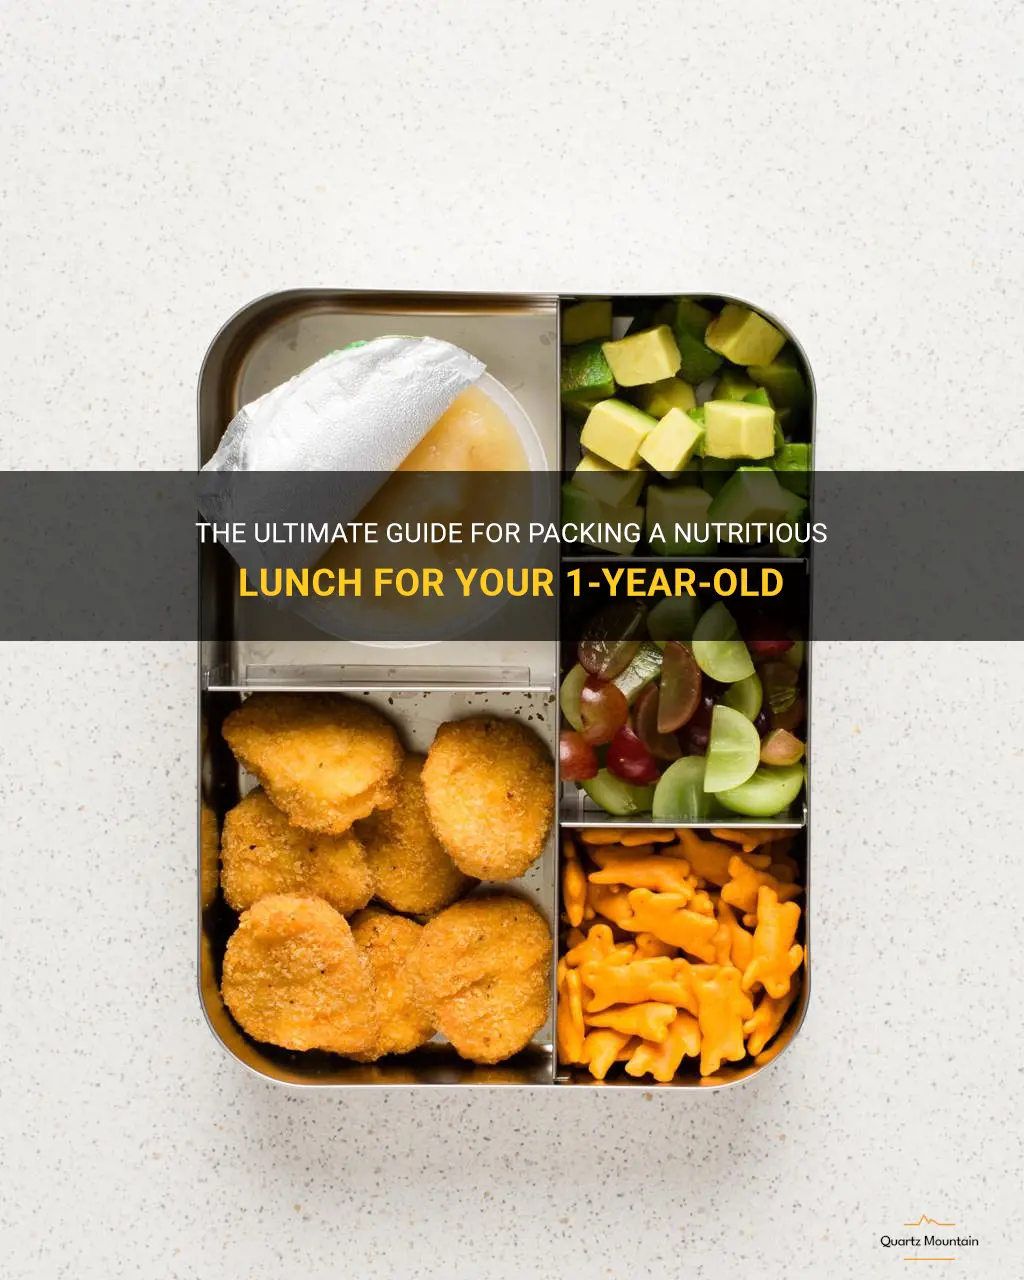 what to pack your 1 year old for lunch